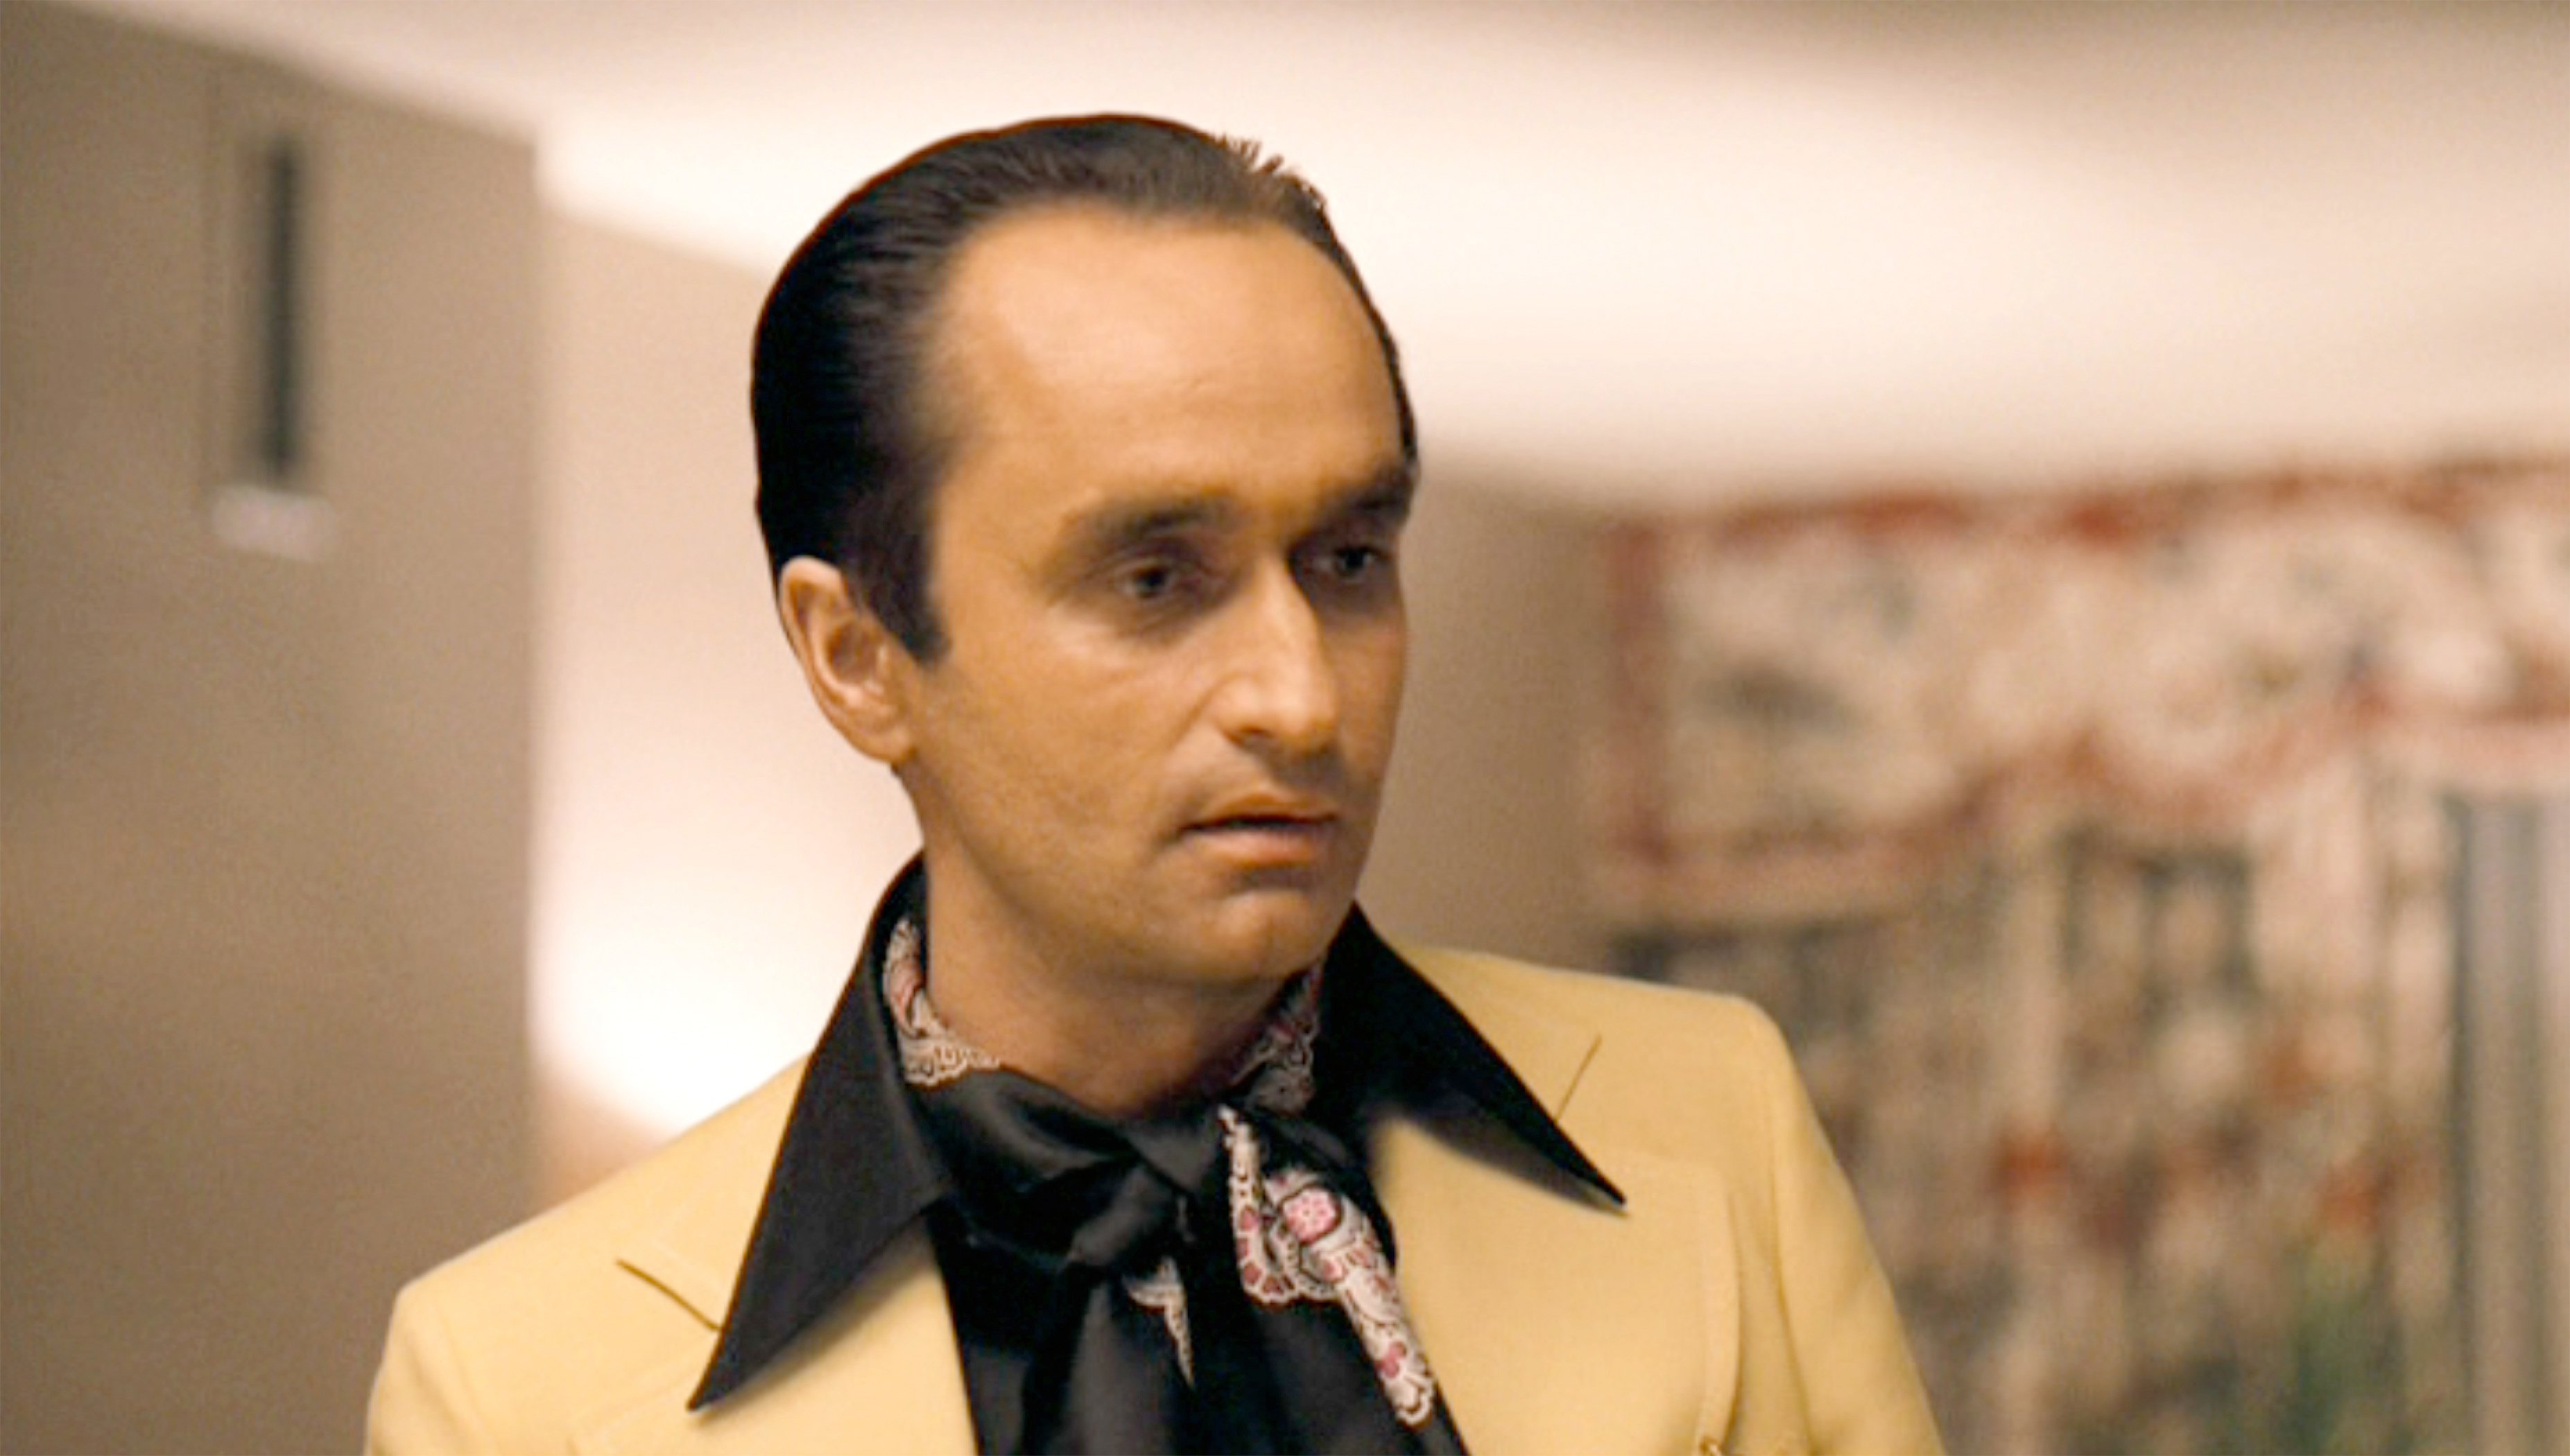 John Cazale as Fredo Corleone in "The Godfather" |  Source: Getty Images